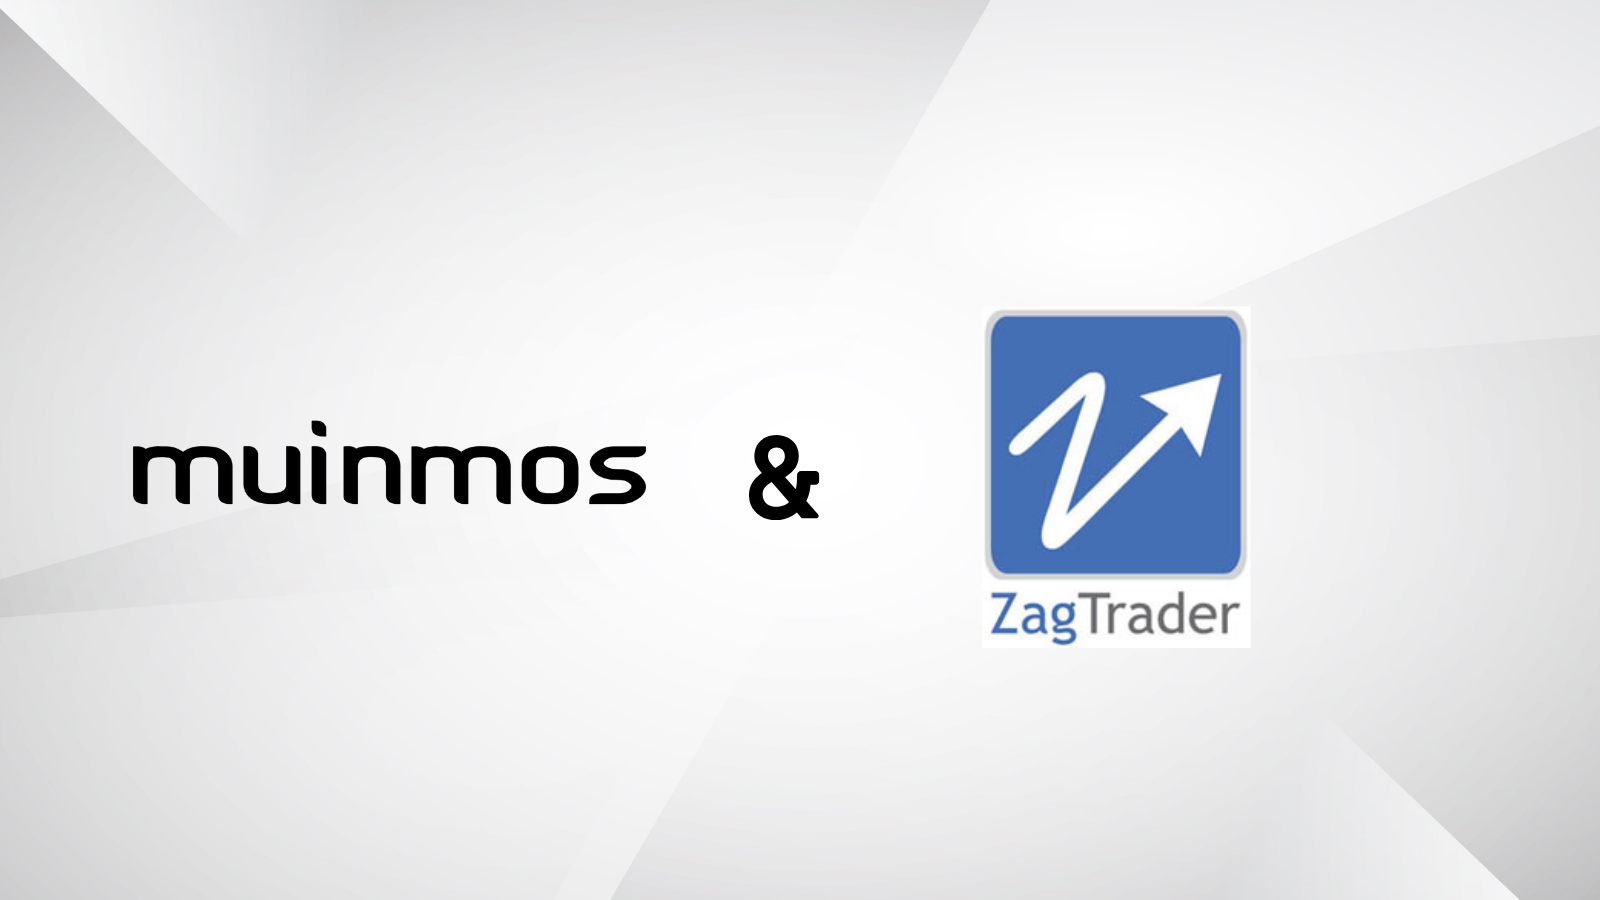 ZagTrader Integrates with Muinmos to Transform Client Onboarding